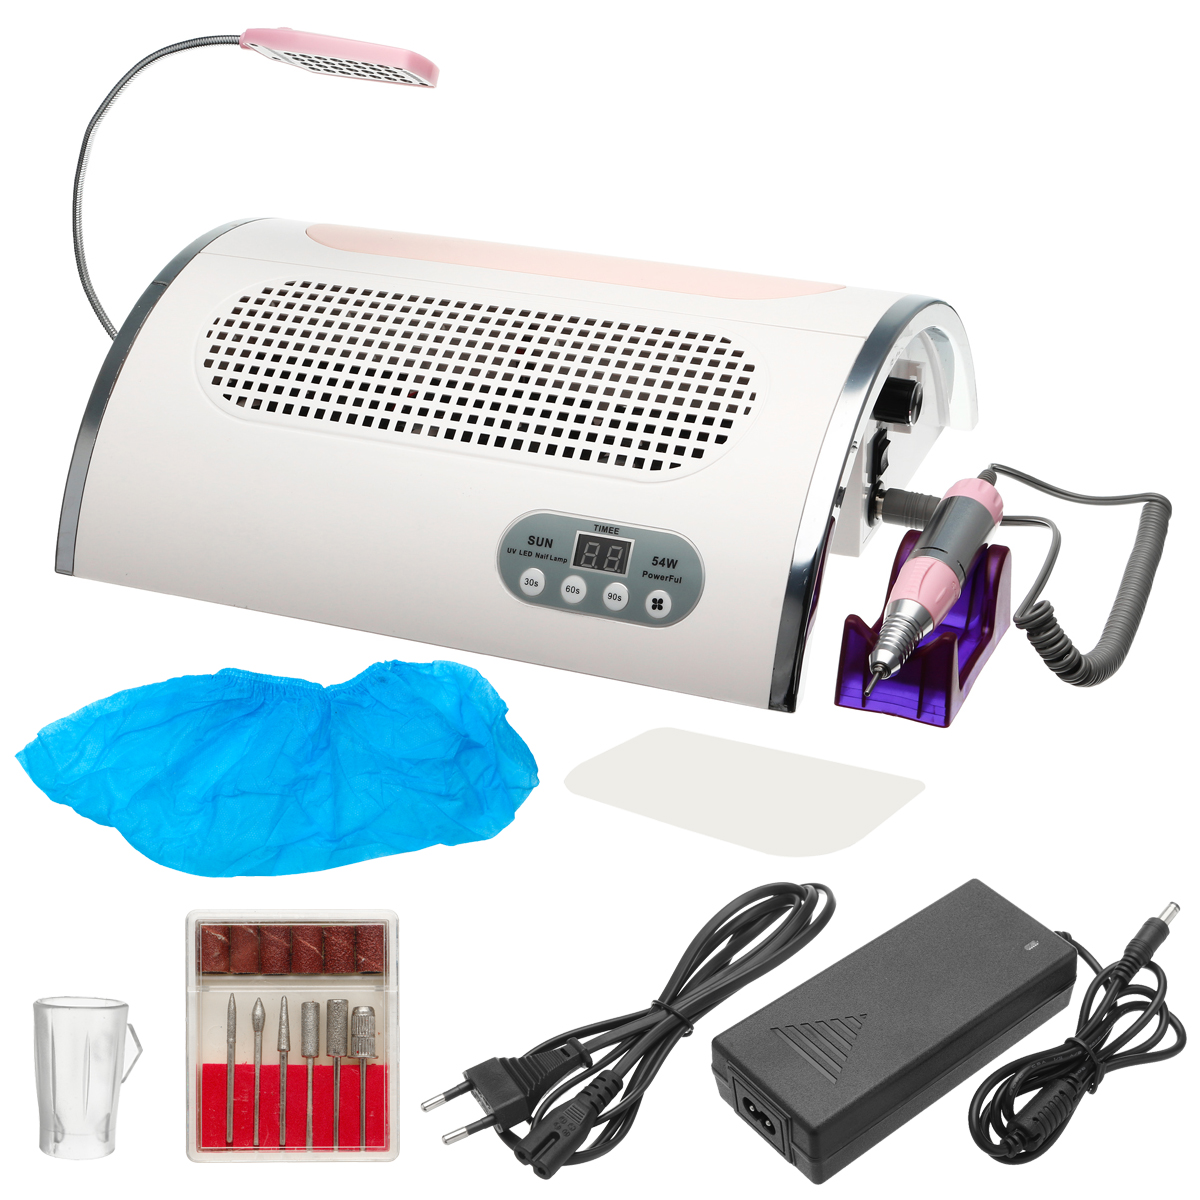 

100-240V 3 in 1 25000RPM Electric Nail Drill Art Set Dust Collector Suction Machine with Lamp